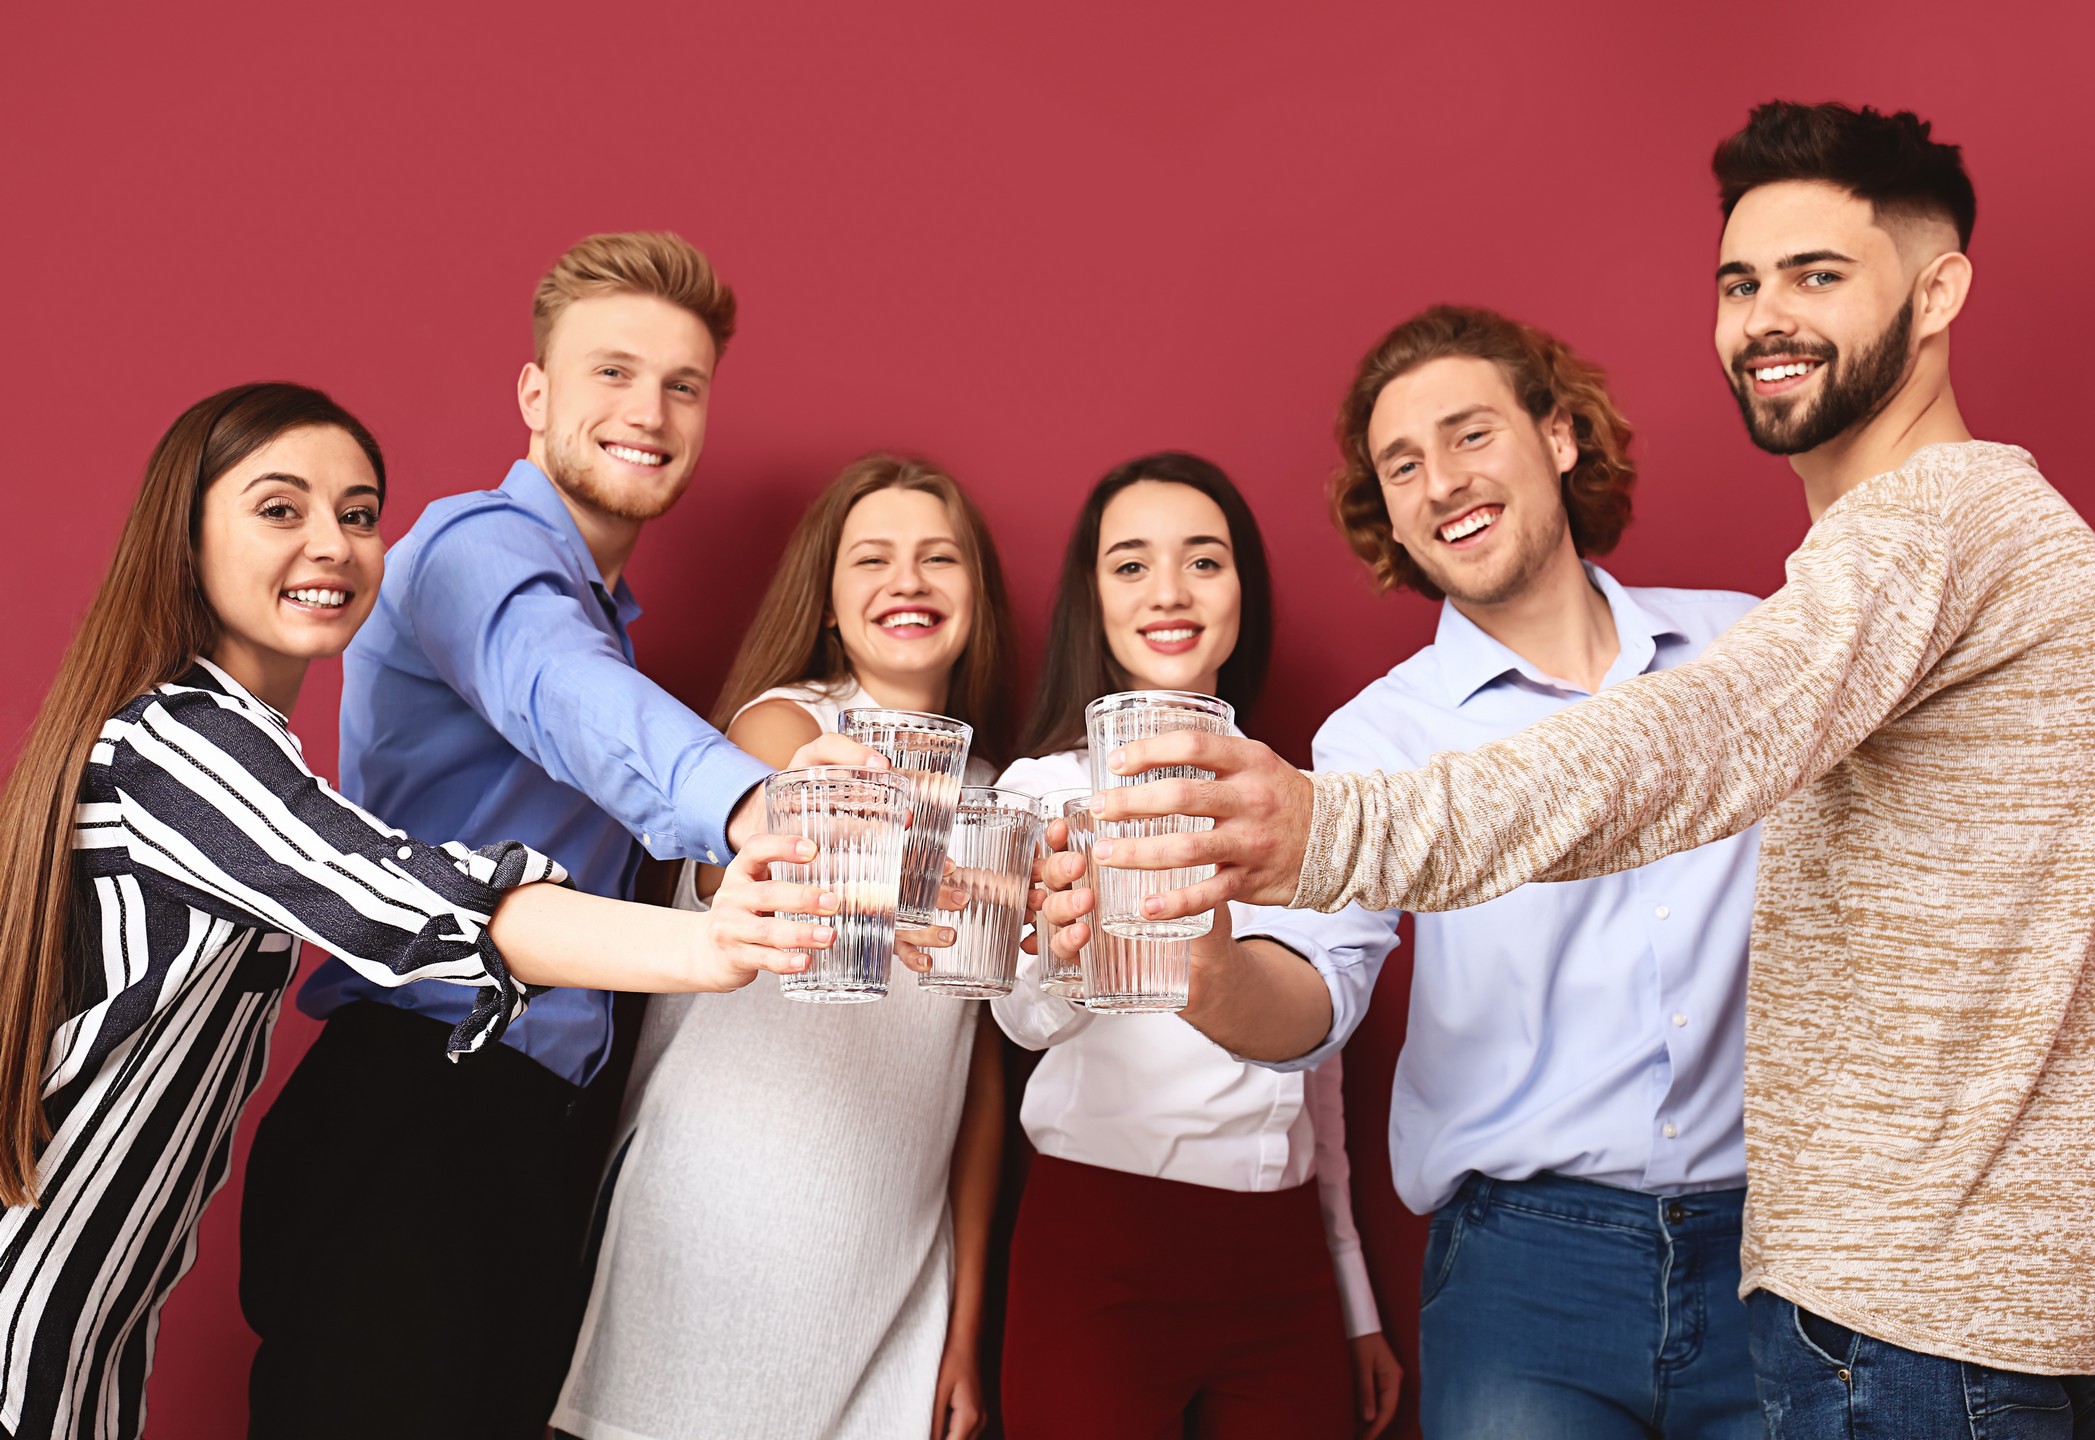 New York City Employee Perks | Positive Lifestyle Choices | Water Filtration System